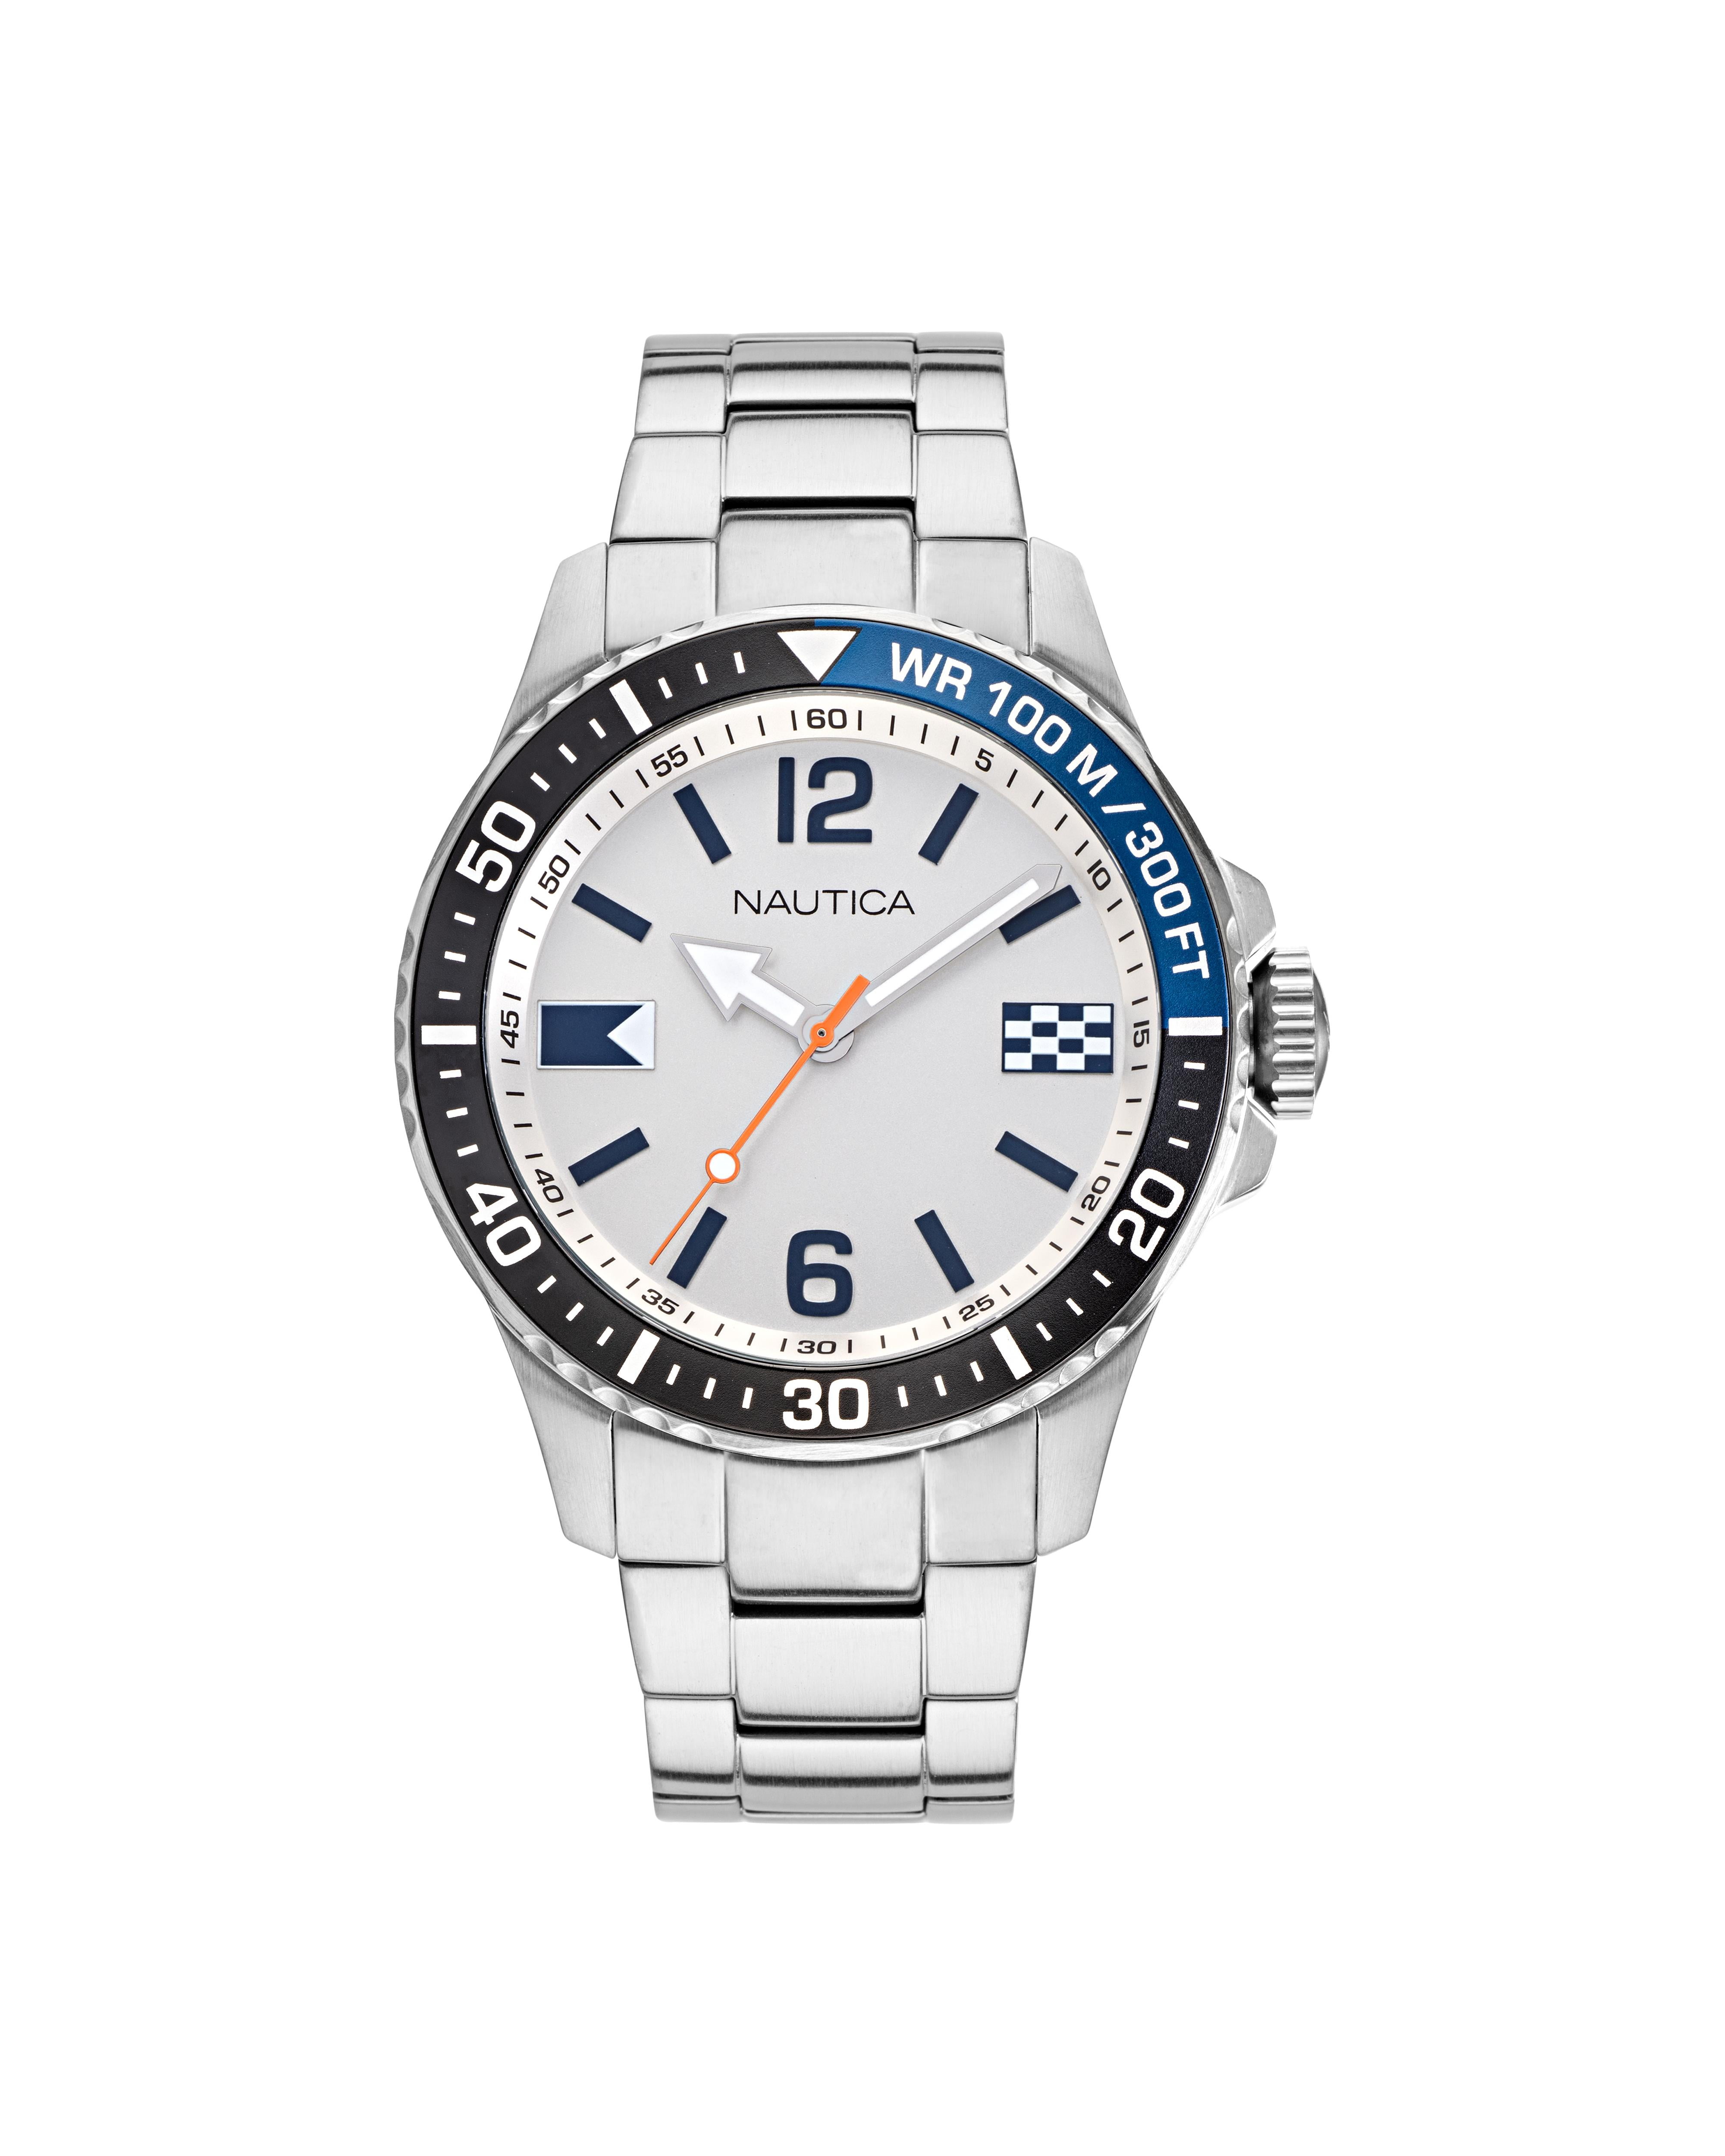 Nautica Men's Freeboard NAPFRB921 44mm White Dial Stainless Steel Watch ...